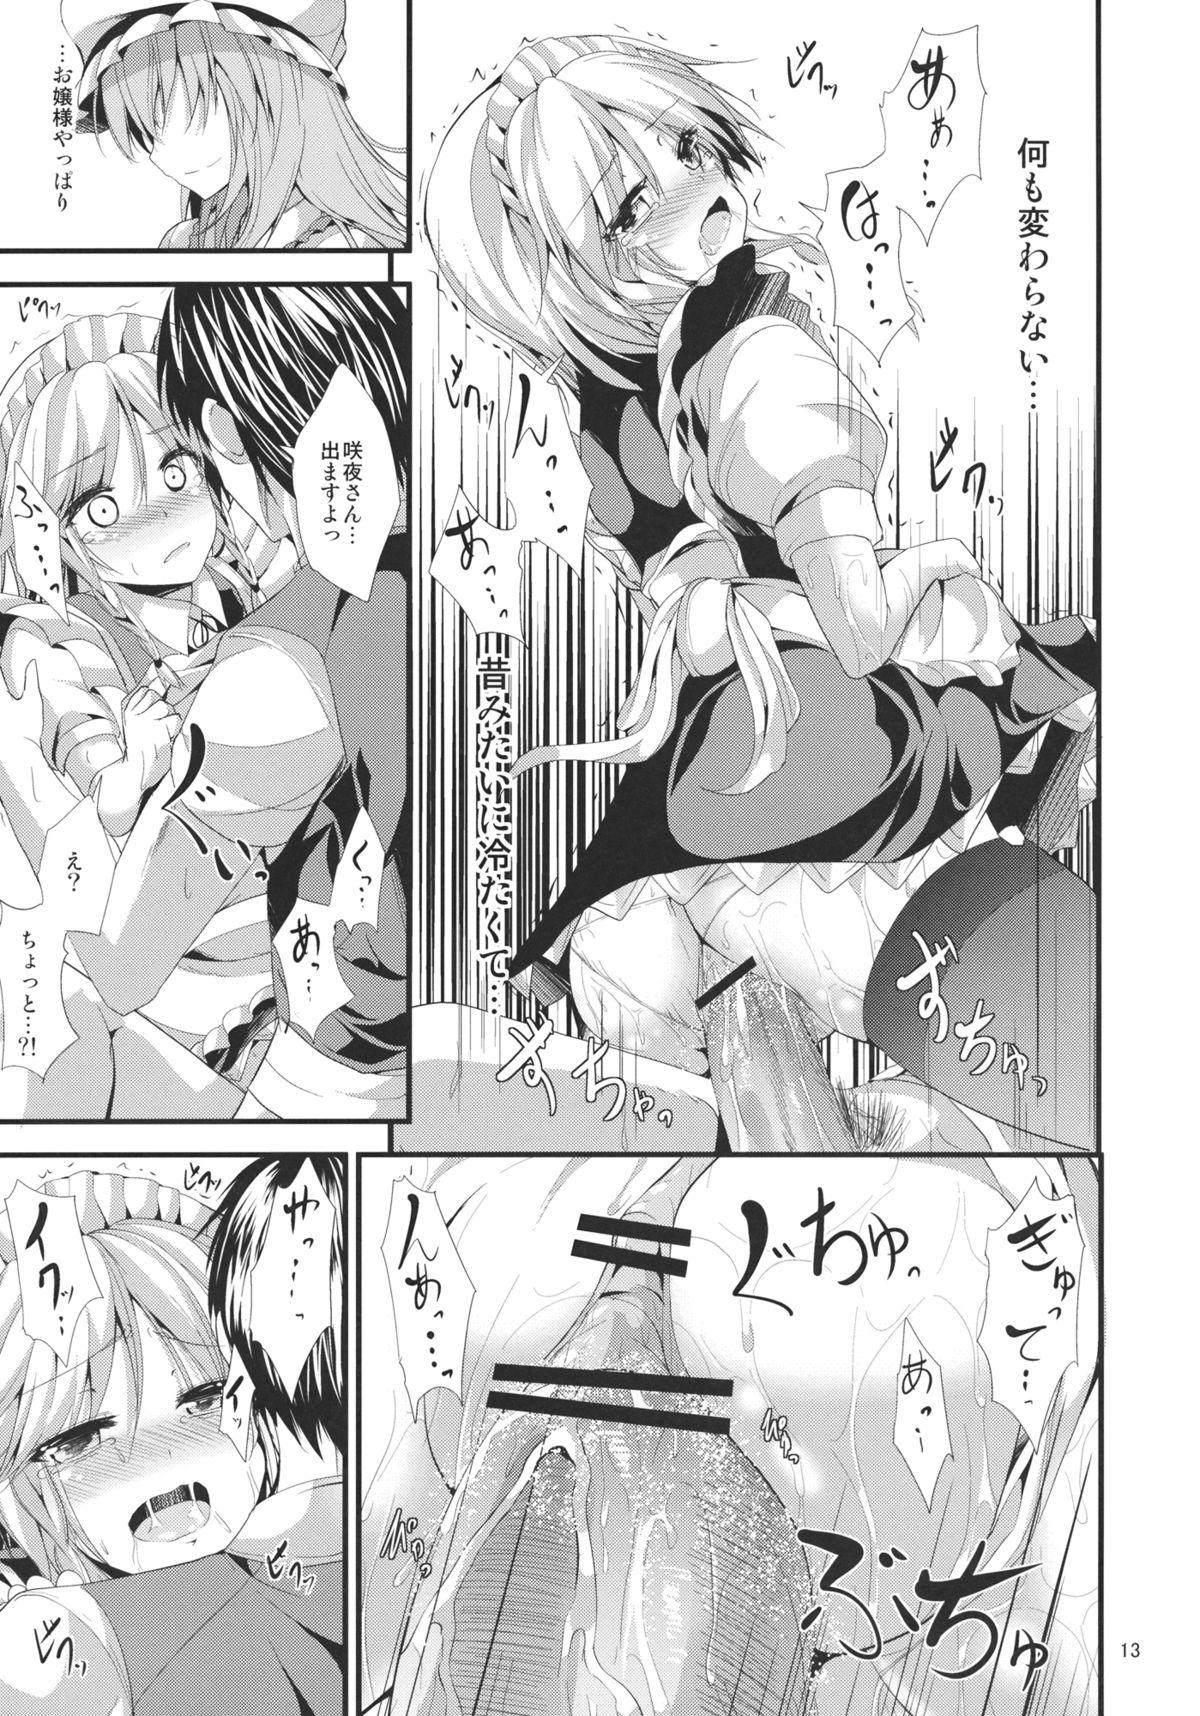 Shorts Summer vacation - Touhou project Amateur Porn Free - Page 10